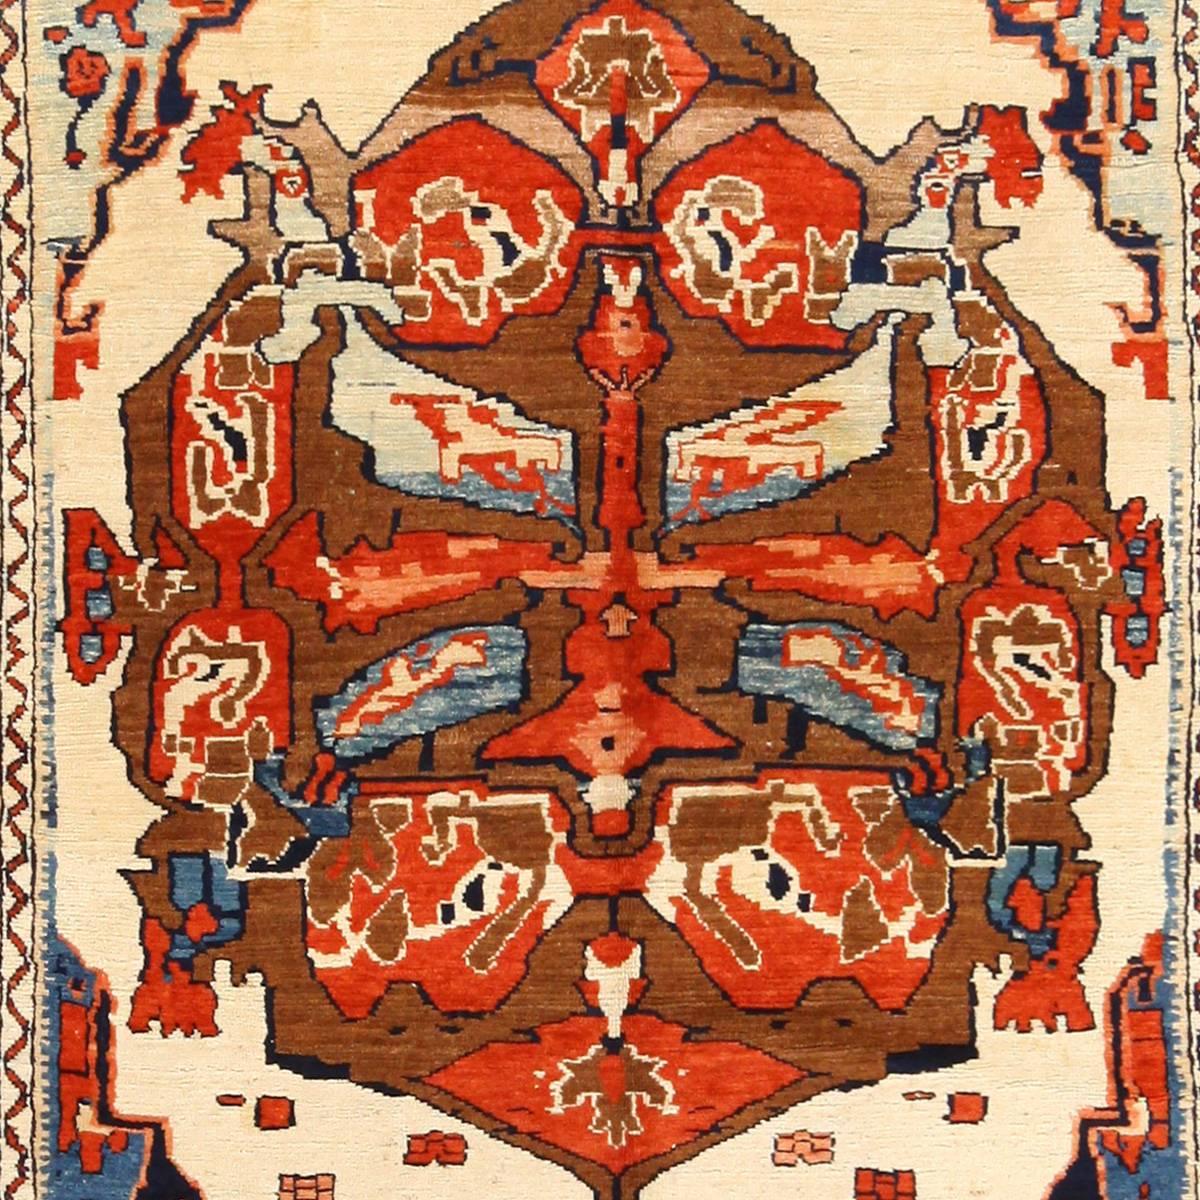 The carpets of Northwest Persia are in a class of their own. Prized for their strong geometric style, fine construction and rich colors, the carpets of Heriz, Serapi and Bakshaish are regional cousins that share mutual origins.

These northwestern